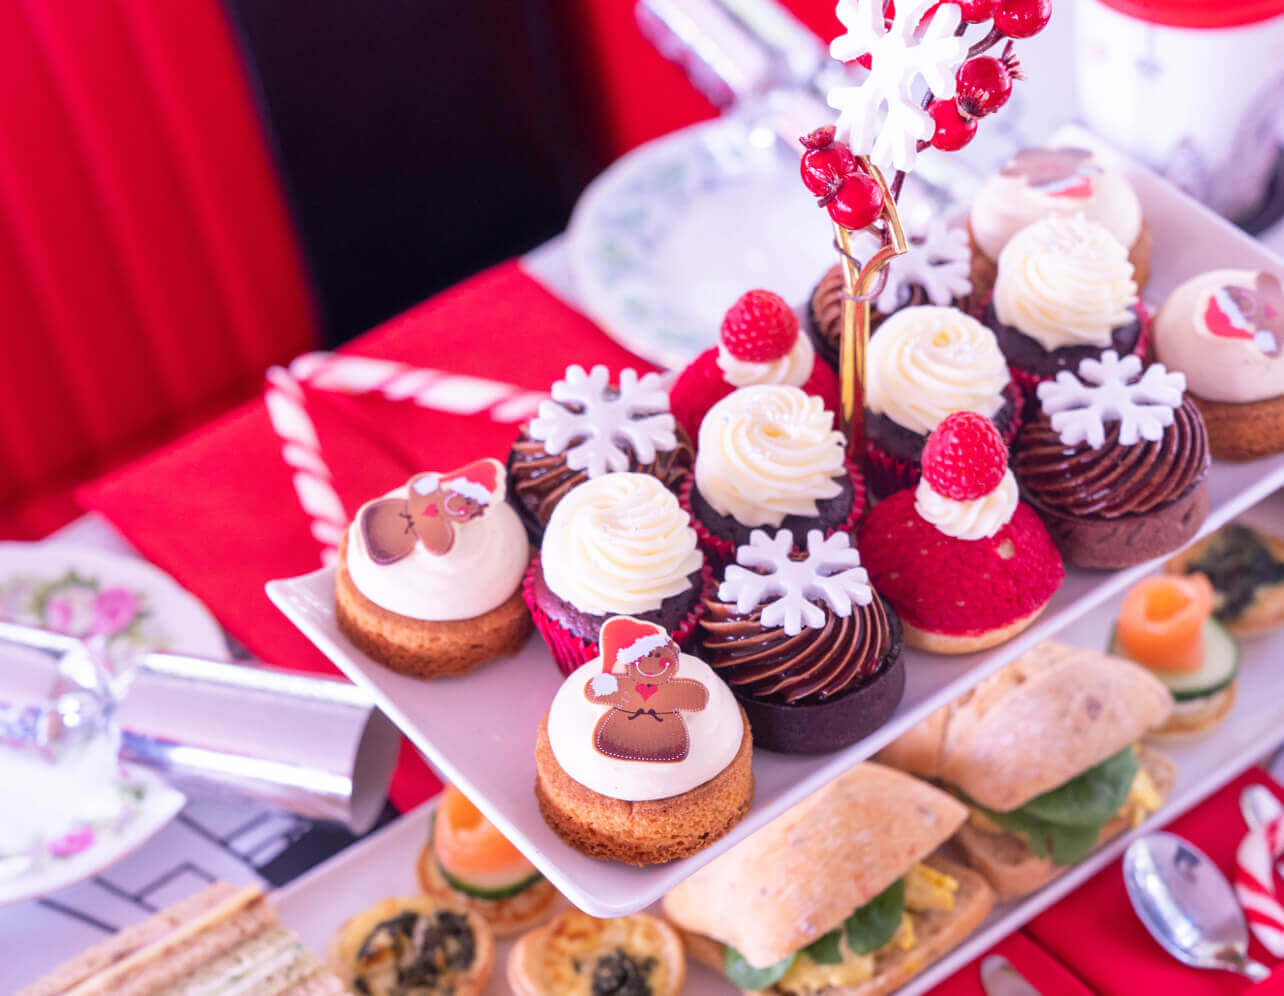 Stand with festive themed cakes and pastries and bottom stand with savouries, atop a table with Christmas crackers  and other Christmas decorations